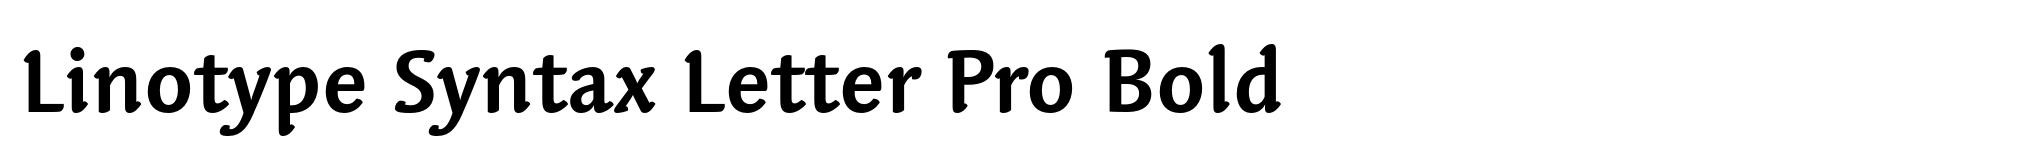 Linotype Syntax Letter Pro Bold image